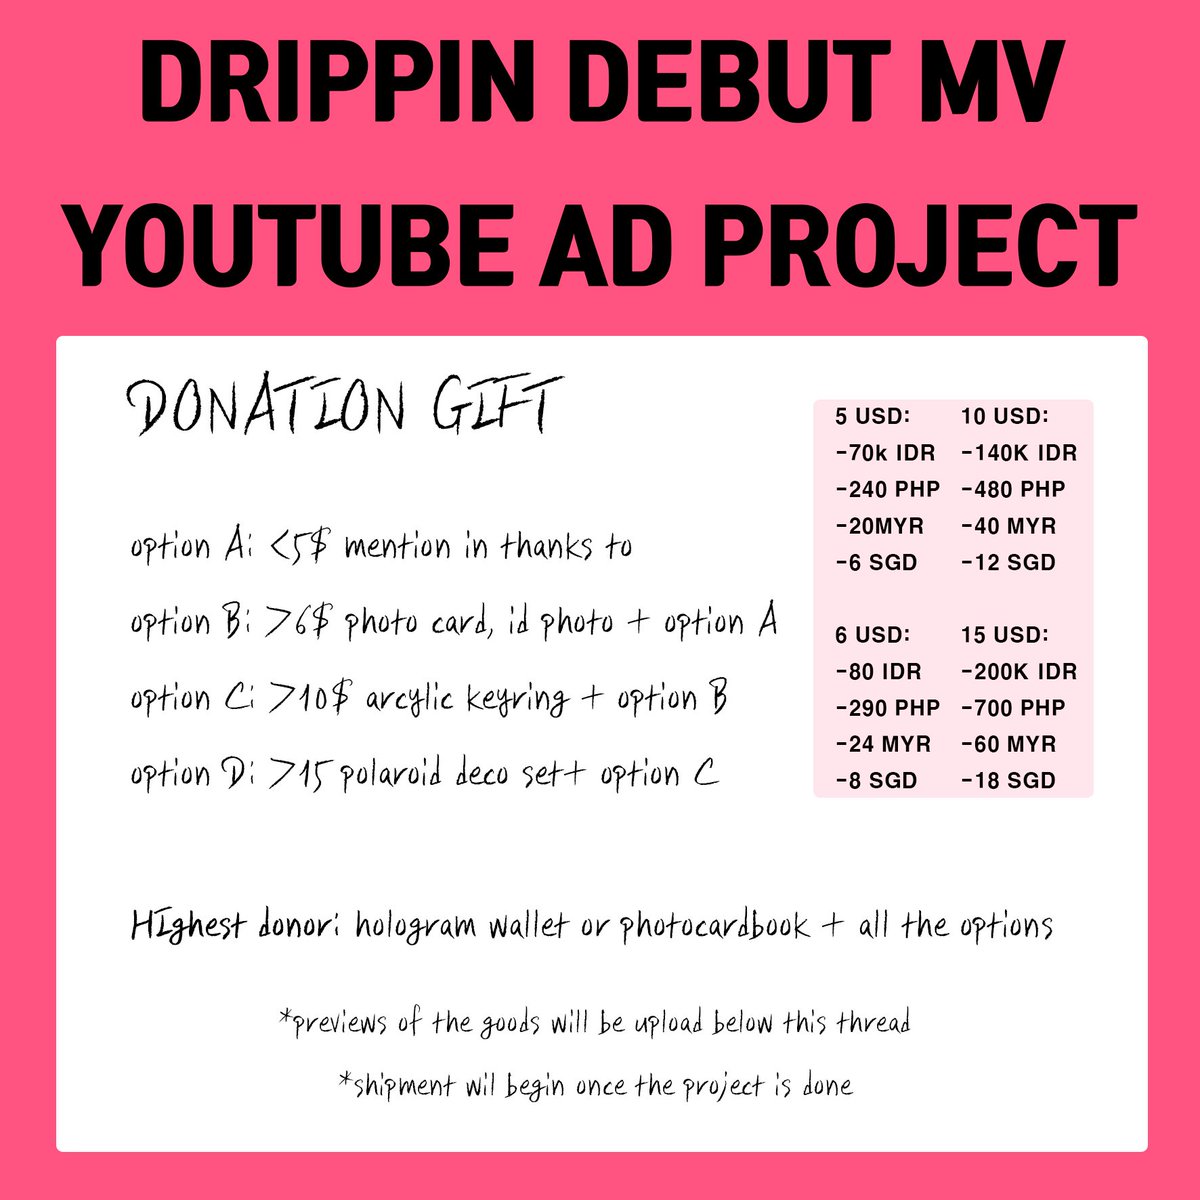 In order to succesfully  #DRIPPIN debut MV youtube ads project.All fundrasing for youtube ads now we're collaborate it with  @tomyonly_dy. For everyone who fund donation, will get new gift as write on new details posterNew form link   https://docs.google.com/forms/d/e/1FAIpQLSdI56k_fVwAA8HvgJ2UAusNiAkEwqd_imfgFfos4ombX6h_EA/viewform  #드리핀  @drippin